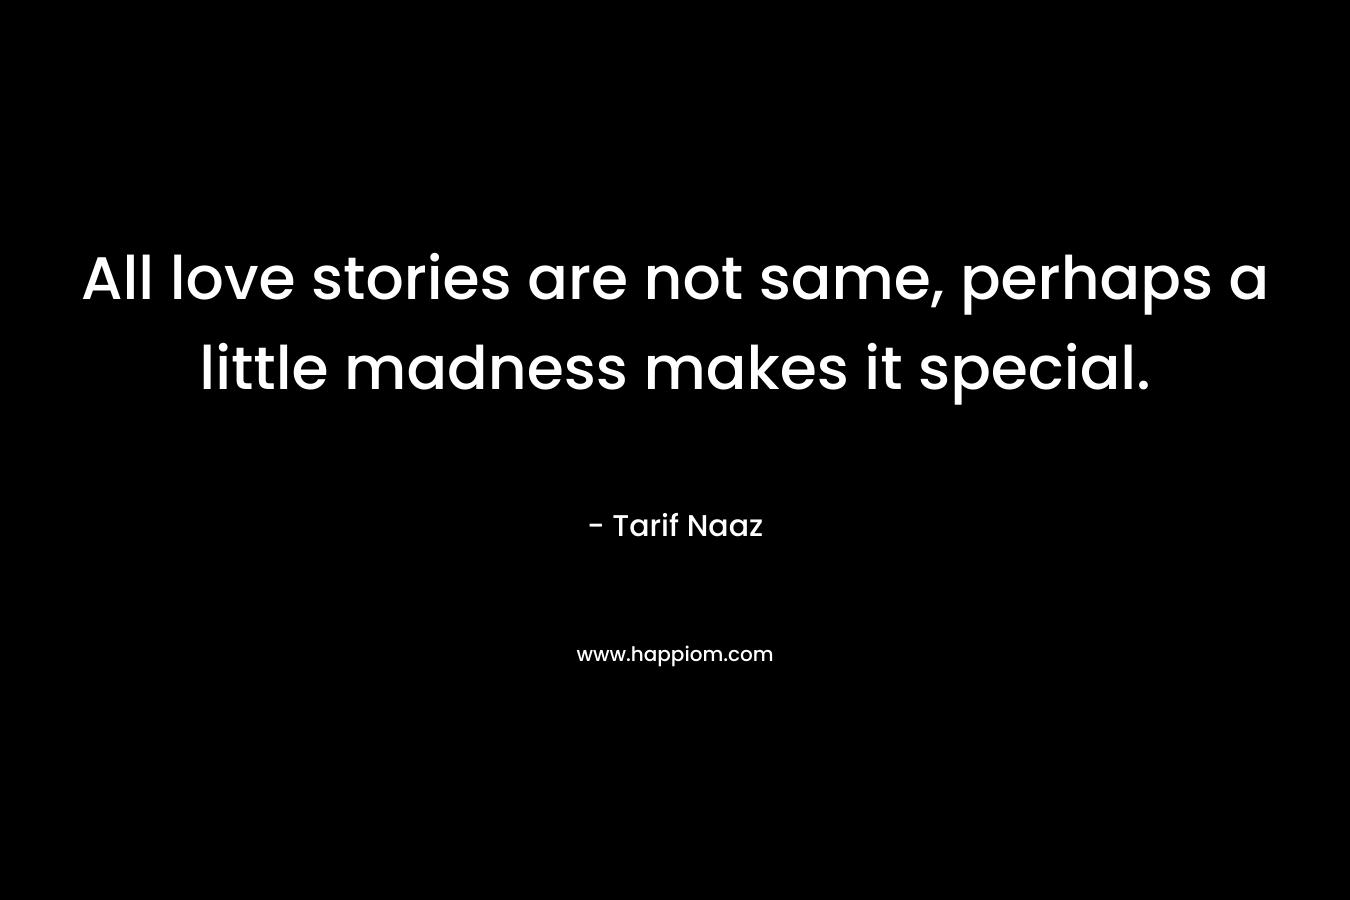 All love stories are not same, perhaps a little madness makes it special. – Tarif Naaz